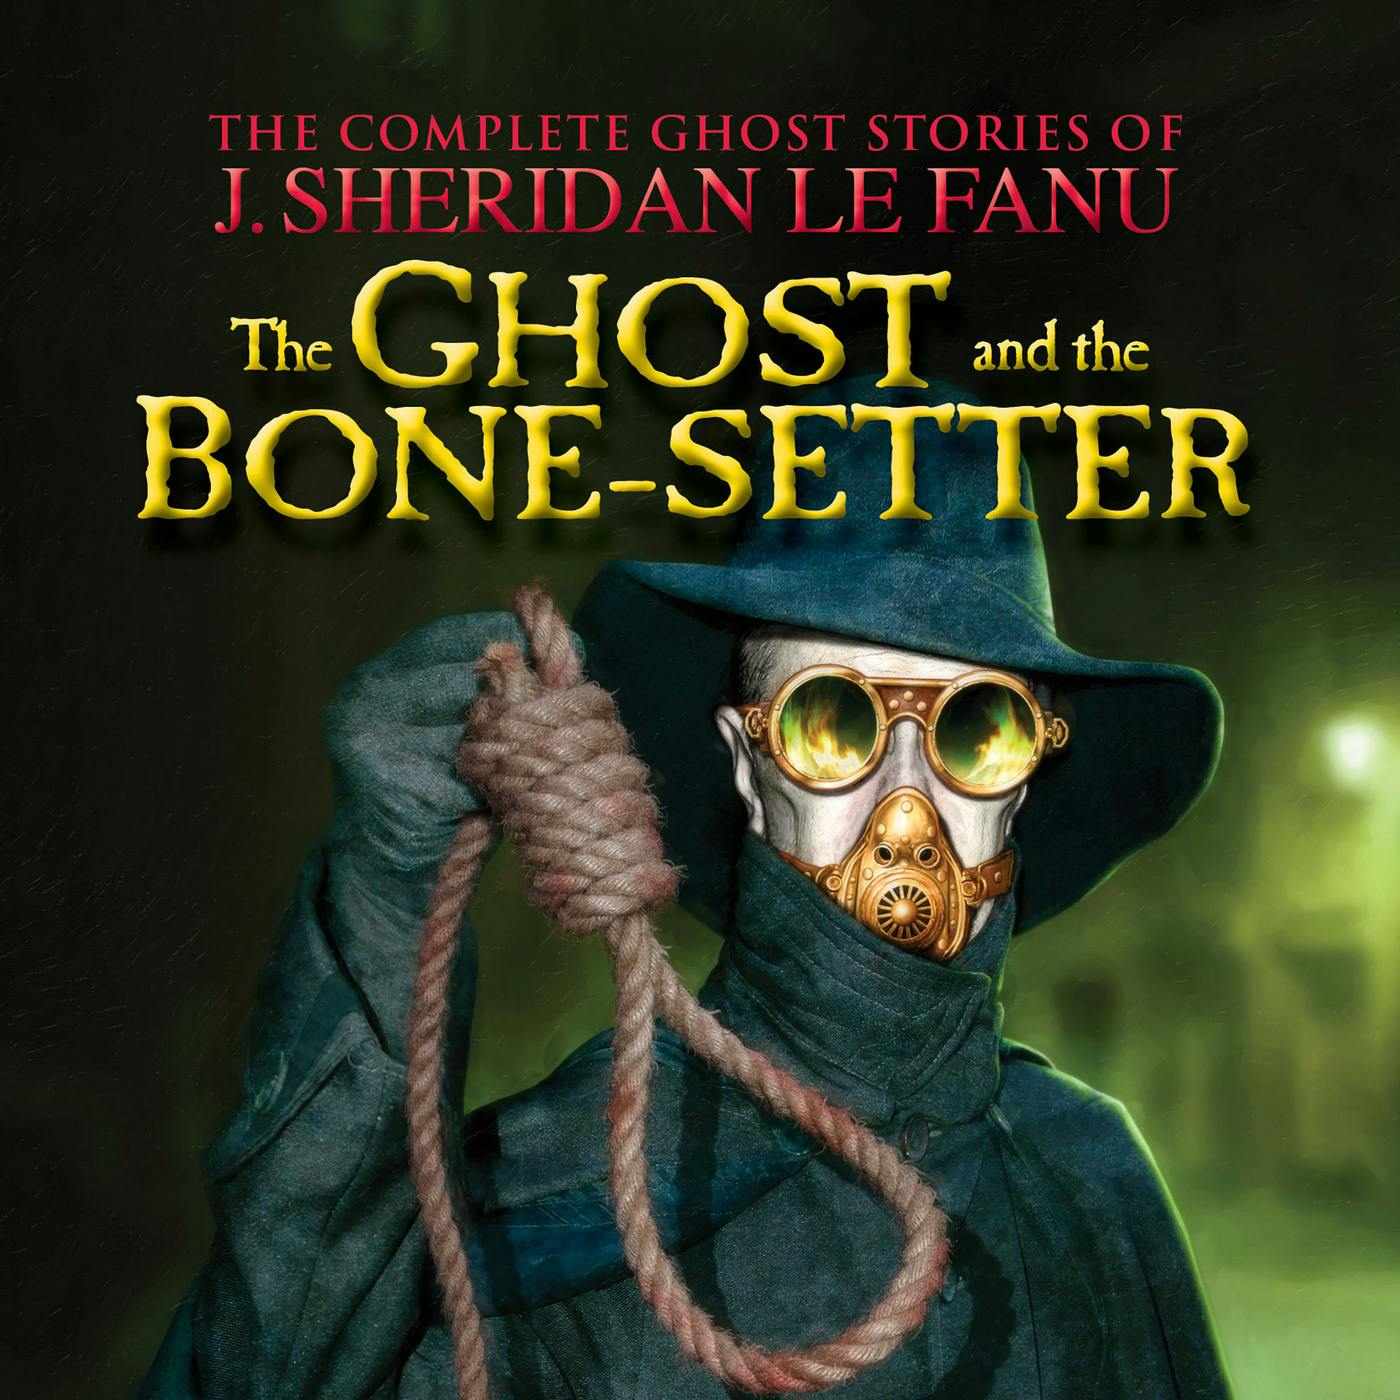 The Ghost and the Bone-setter - The Complete Ghost Stories of J. Sheridan Le Fanu, Vol. 5 of 30 (Unabridged) - undefined